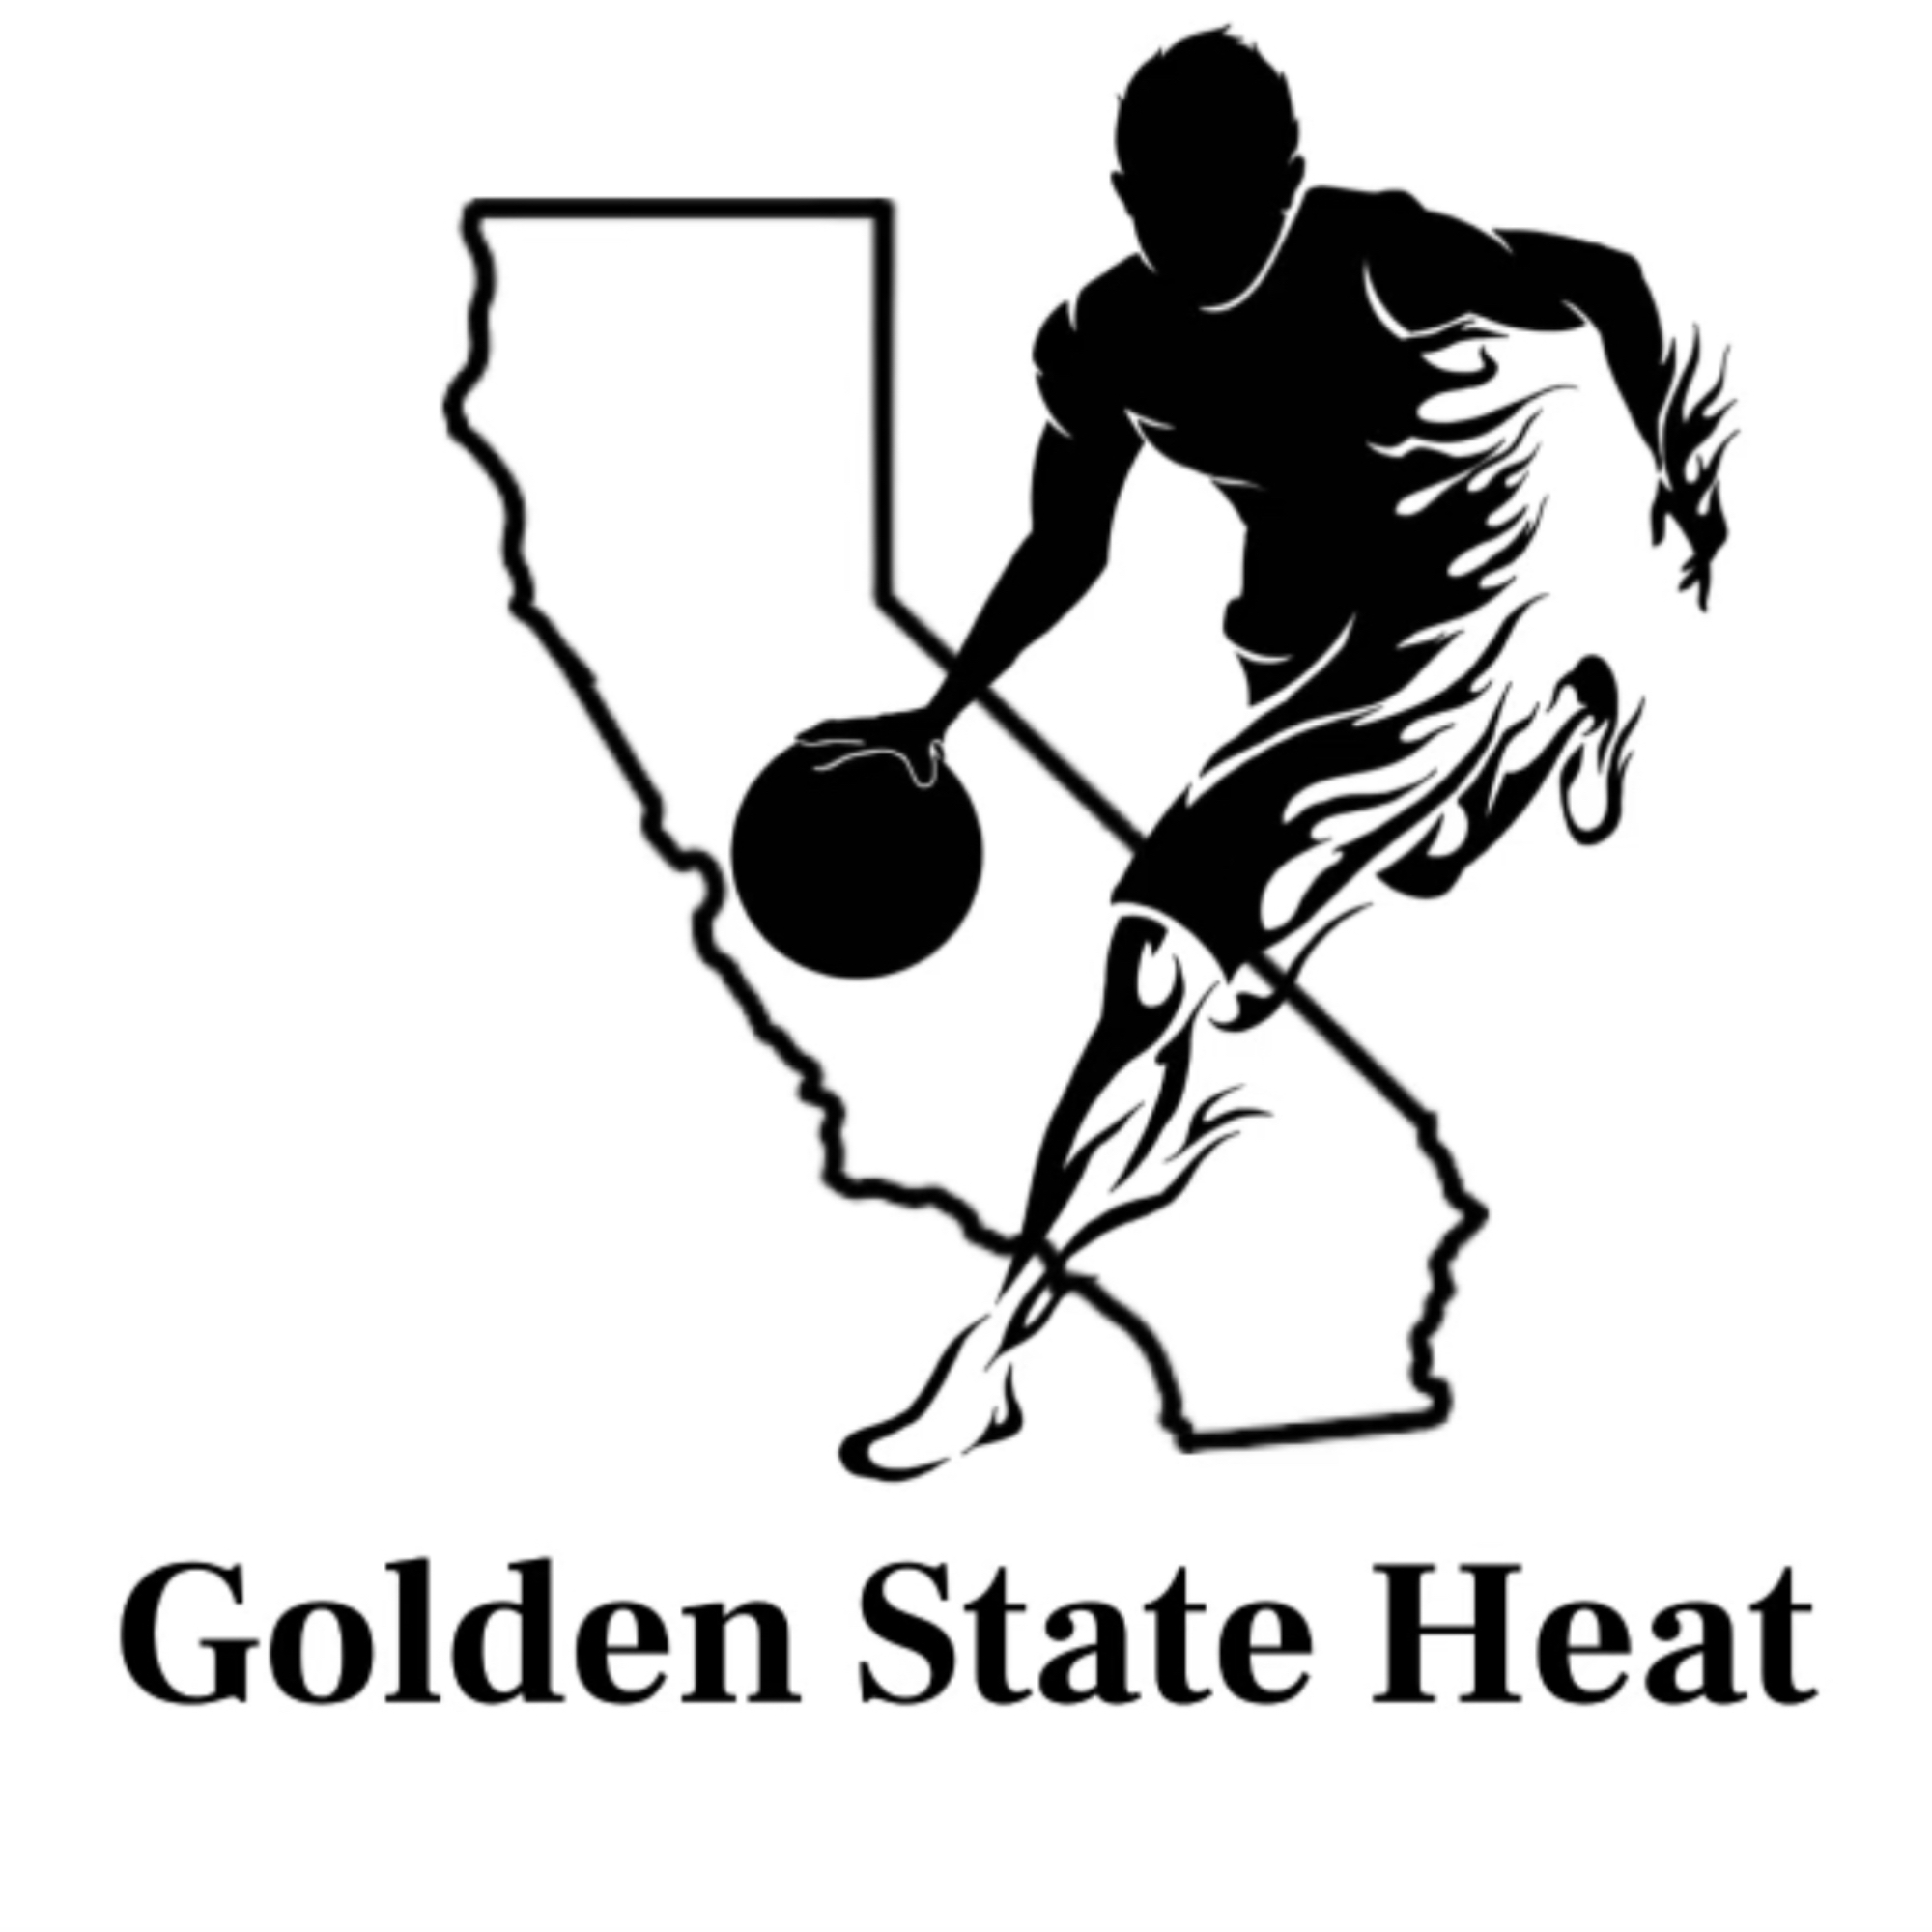 The official logo of Golden State Heat